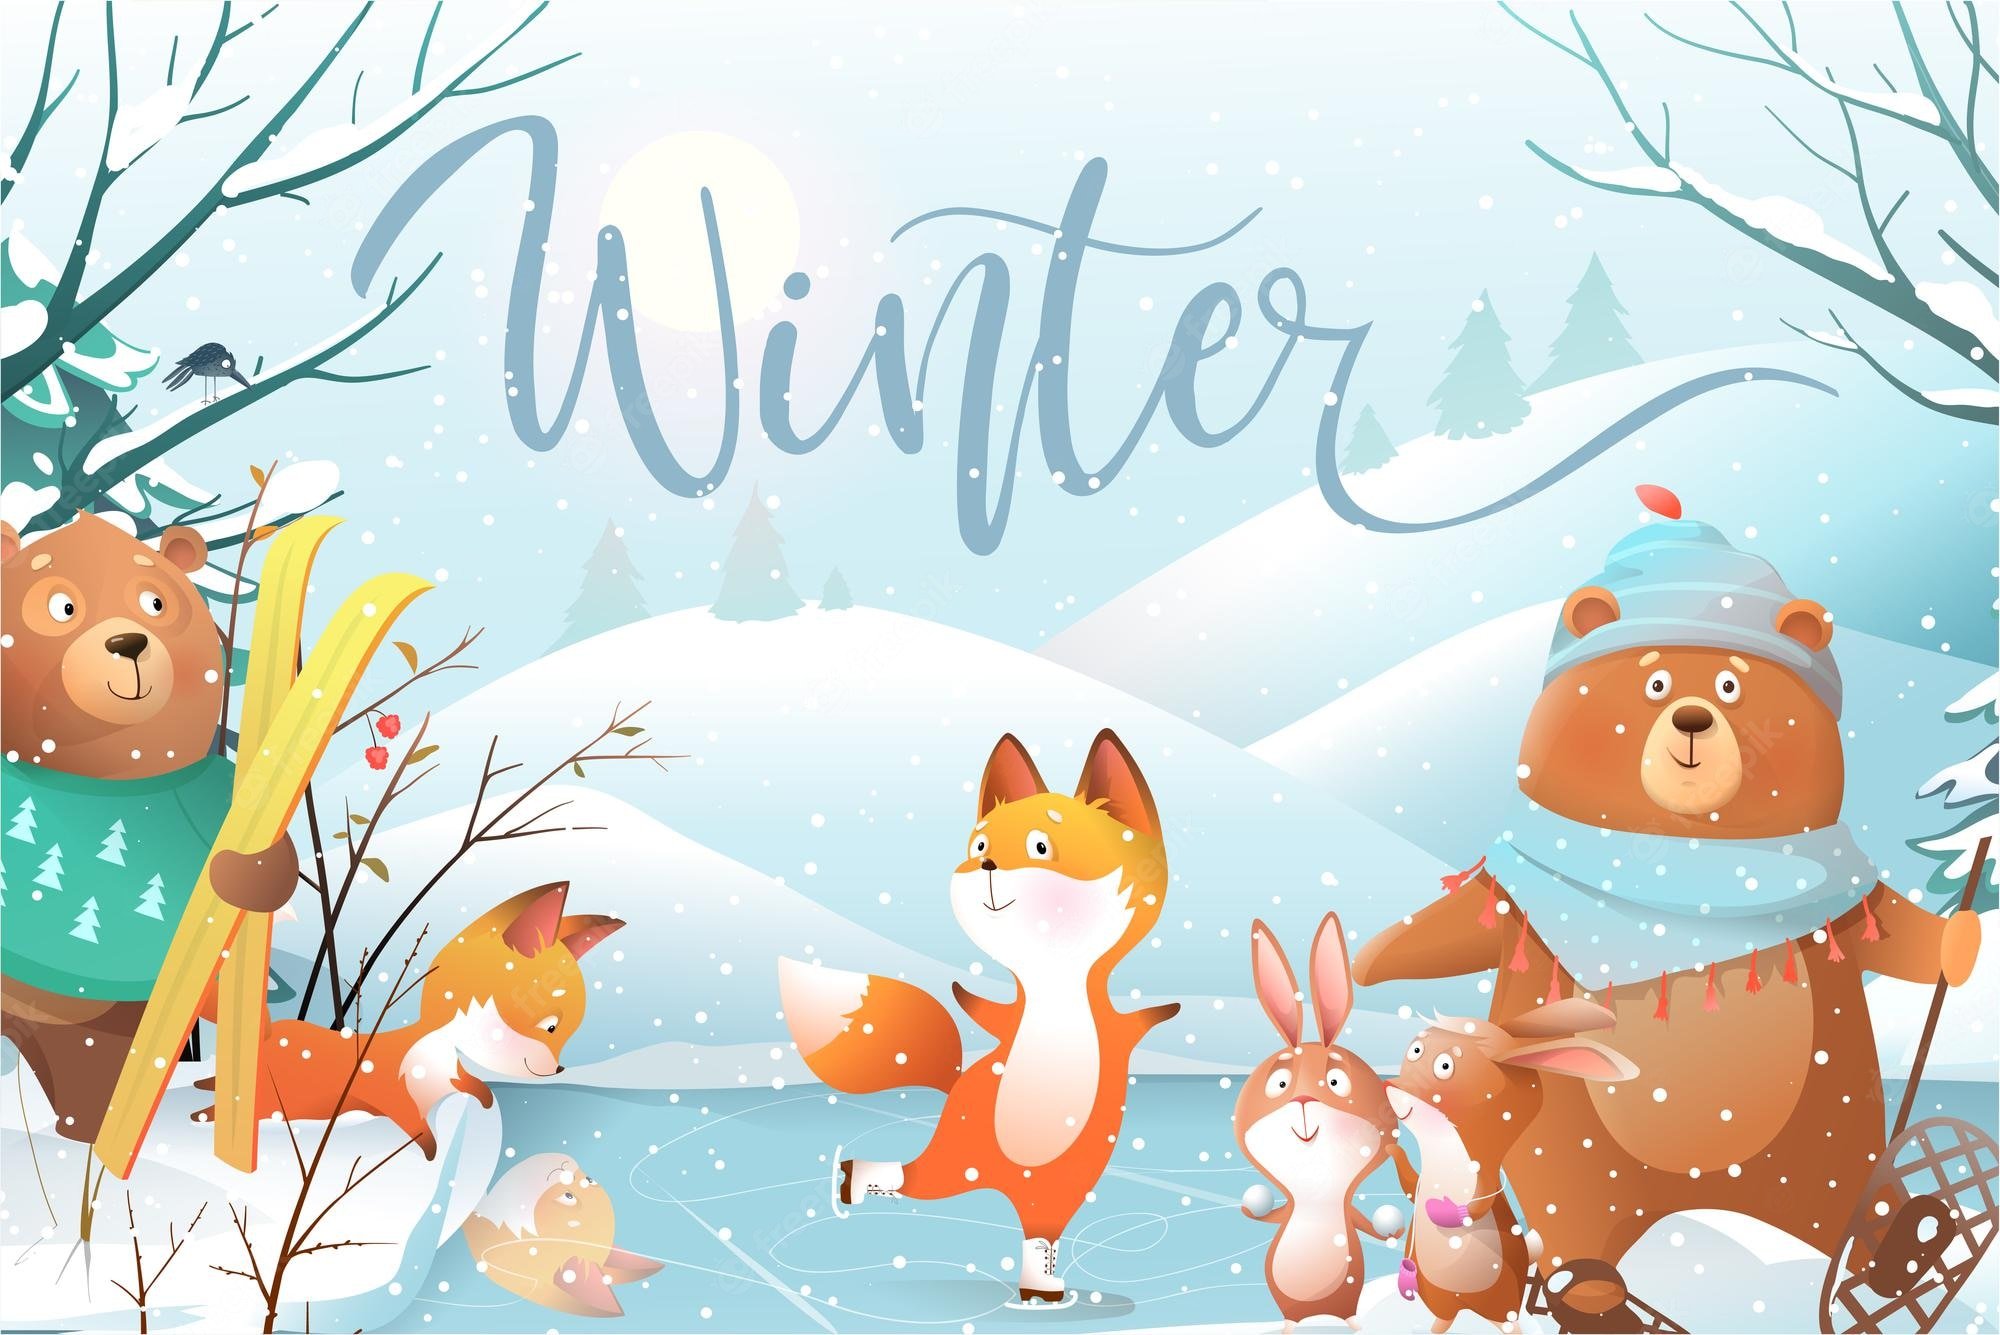 Premium Vector. Winter landscape with kids animals playing skiing and skating on ice merry christmas and happy new year cute cartoon characters in frozen forest wallpaper or invitation vector design